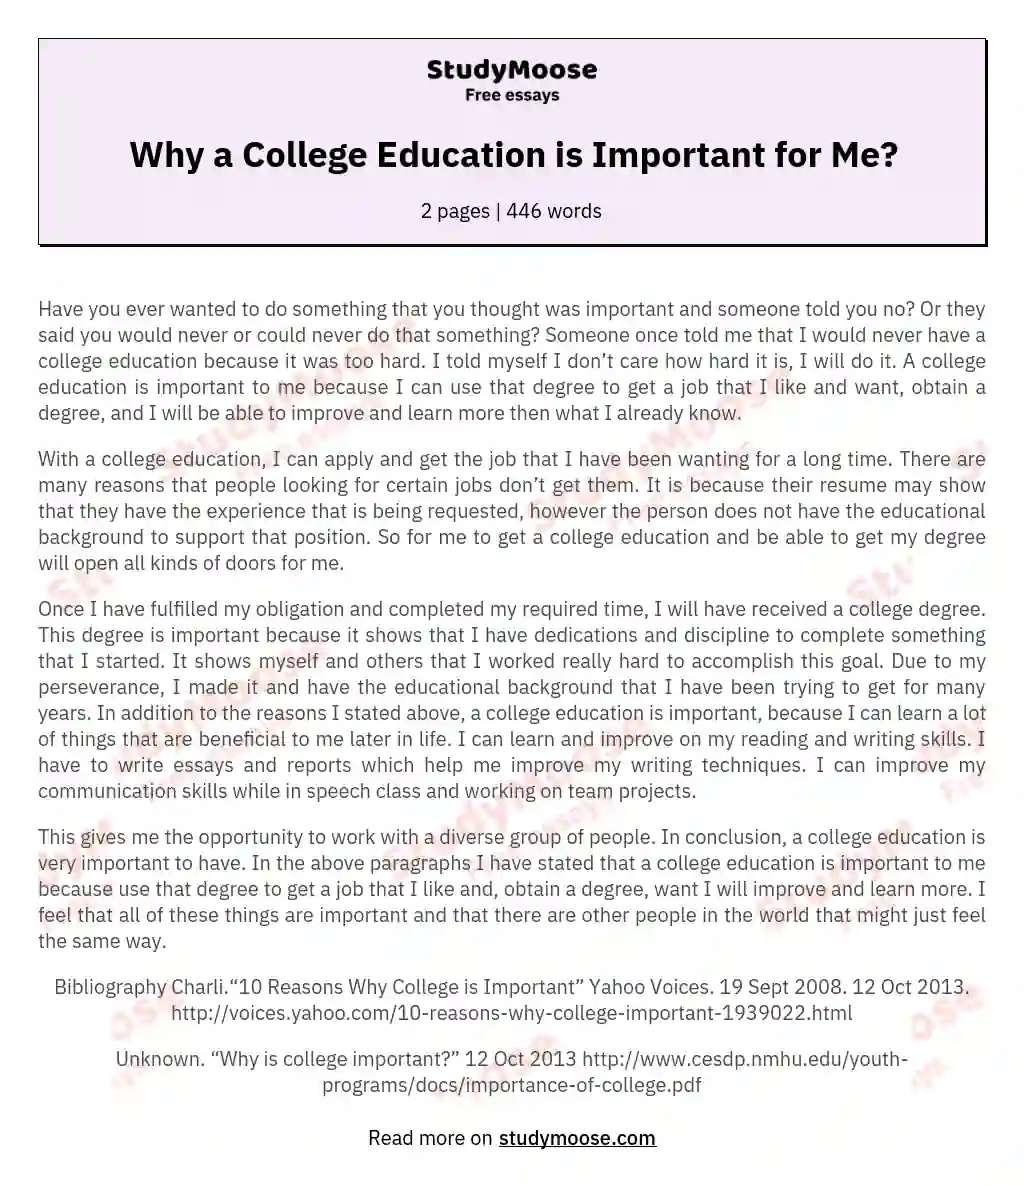 Why a College Education is Important for Me?